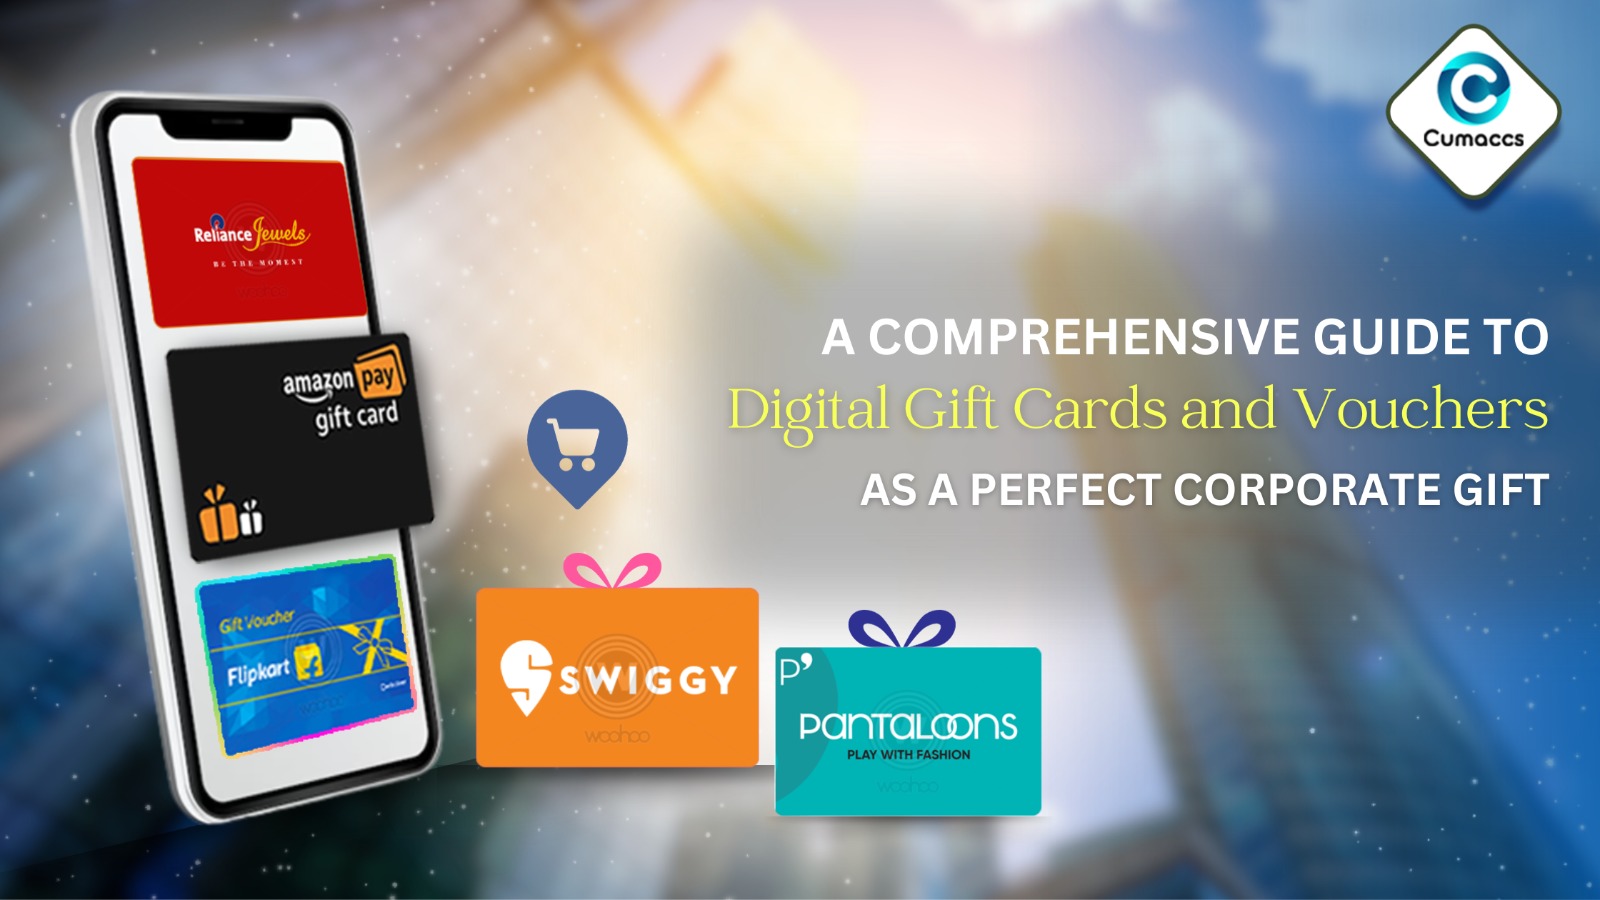 You are currently viewing A Comprehensive Guide to Digital Gift Cards and Vouchers as a Perfect Corporate Gift